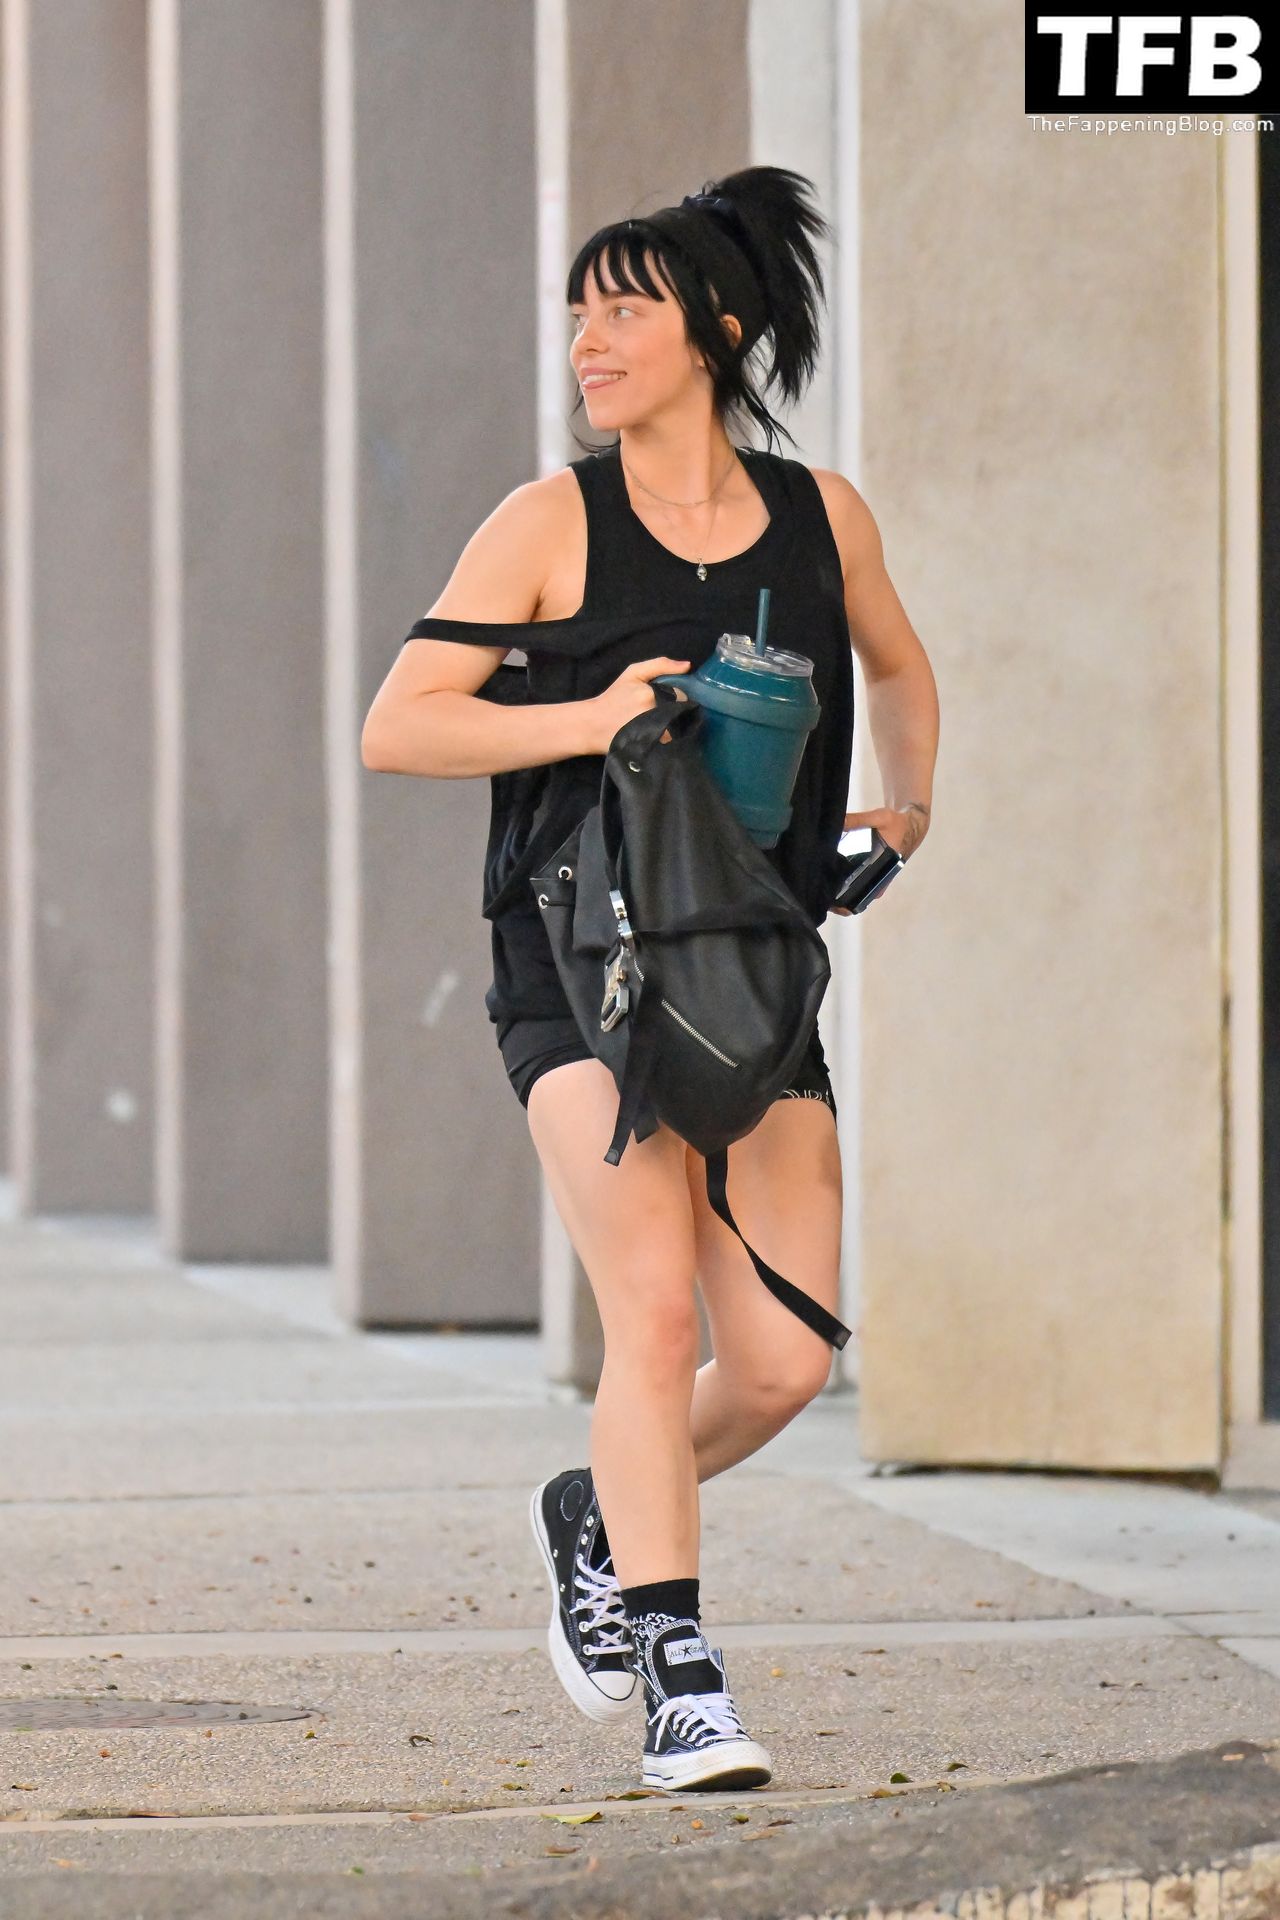 Billie Eilish Sexy The Fappening Blog 17 - Billie Eilish Keeps Up Her Fitness Regime, Stepping Out For Another Workout in Studio City (26 Photos)